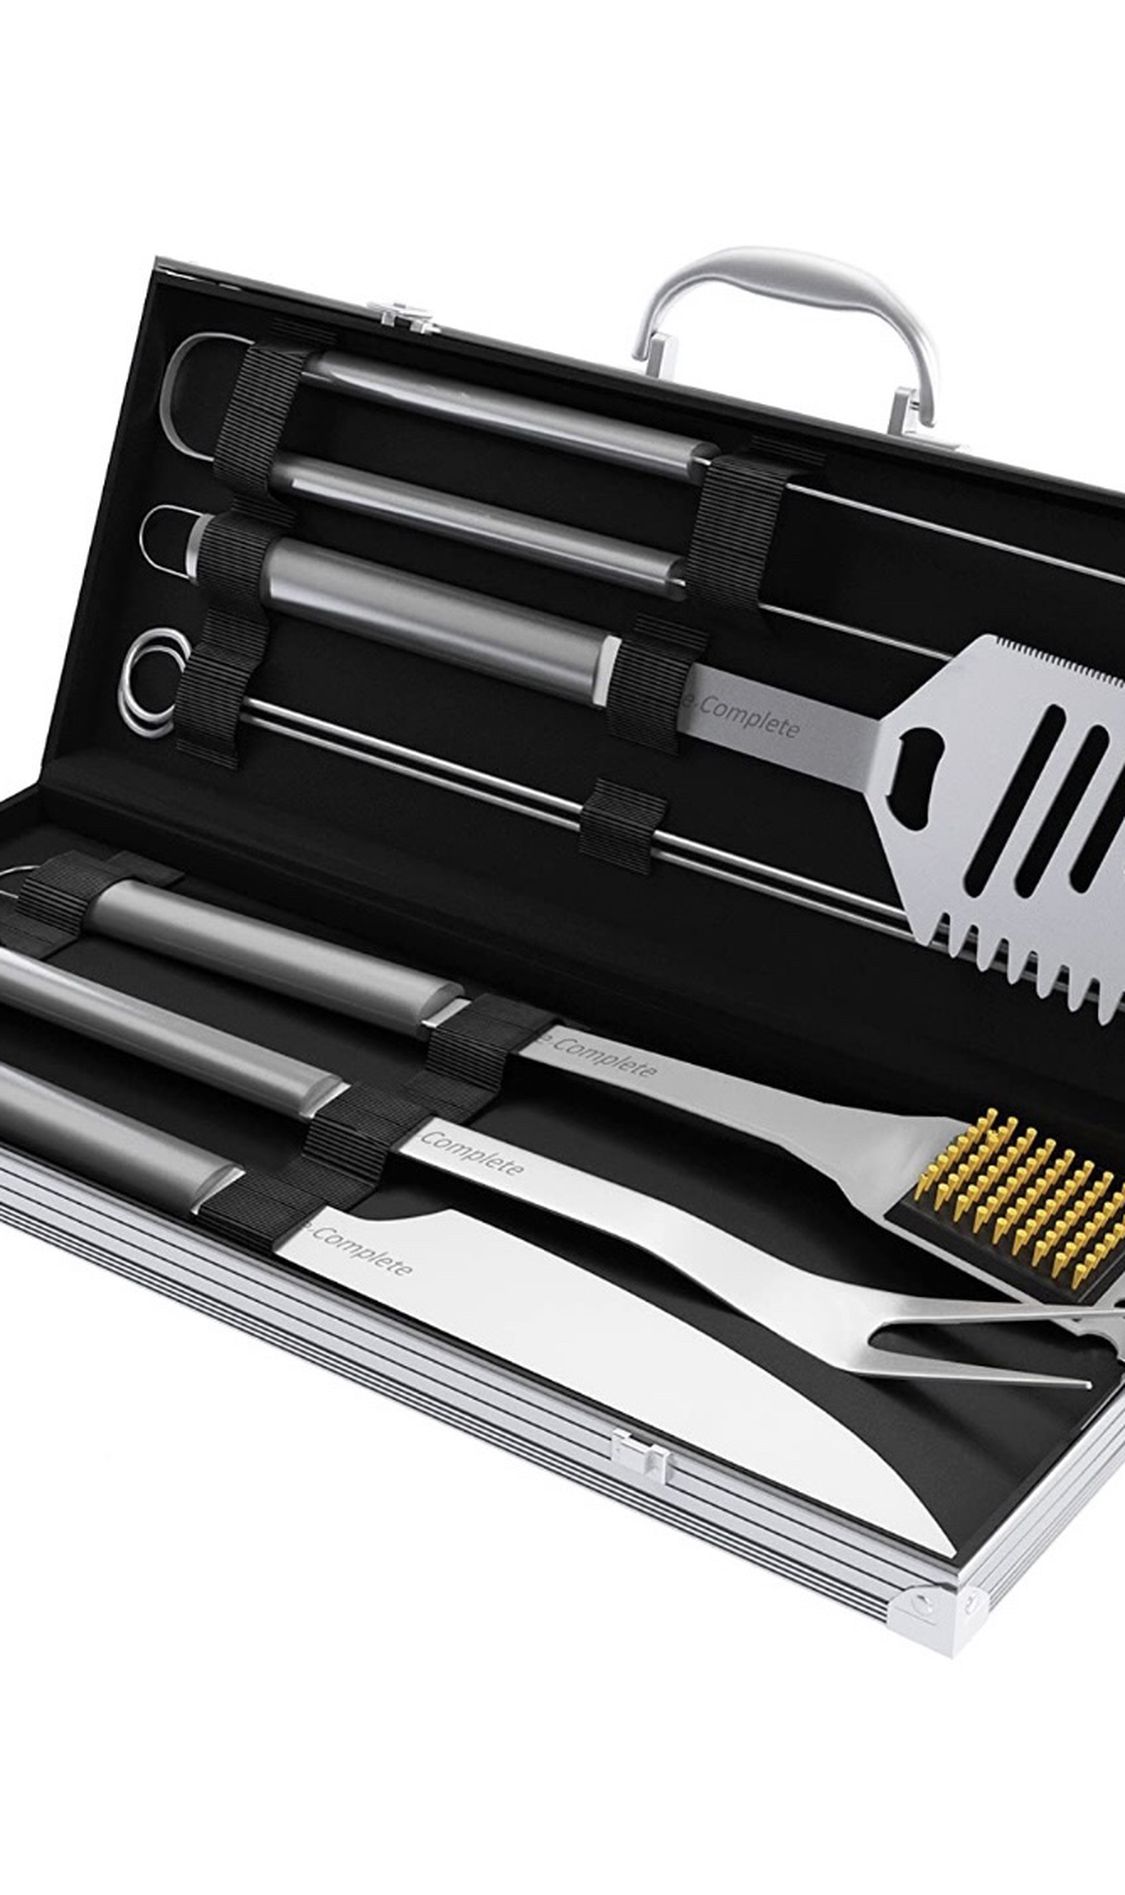 Home-Complete BBQ Grill Tool Set- Stainless Steel Barbecue Grilling Accessories Aluminum Storage Case, Includes Spatula, Tongs, Basting Brush